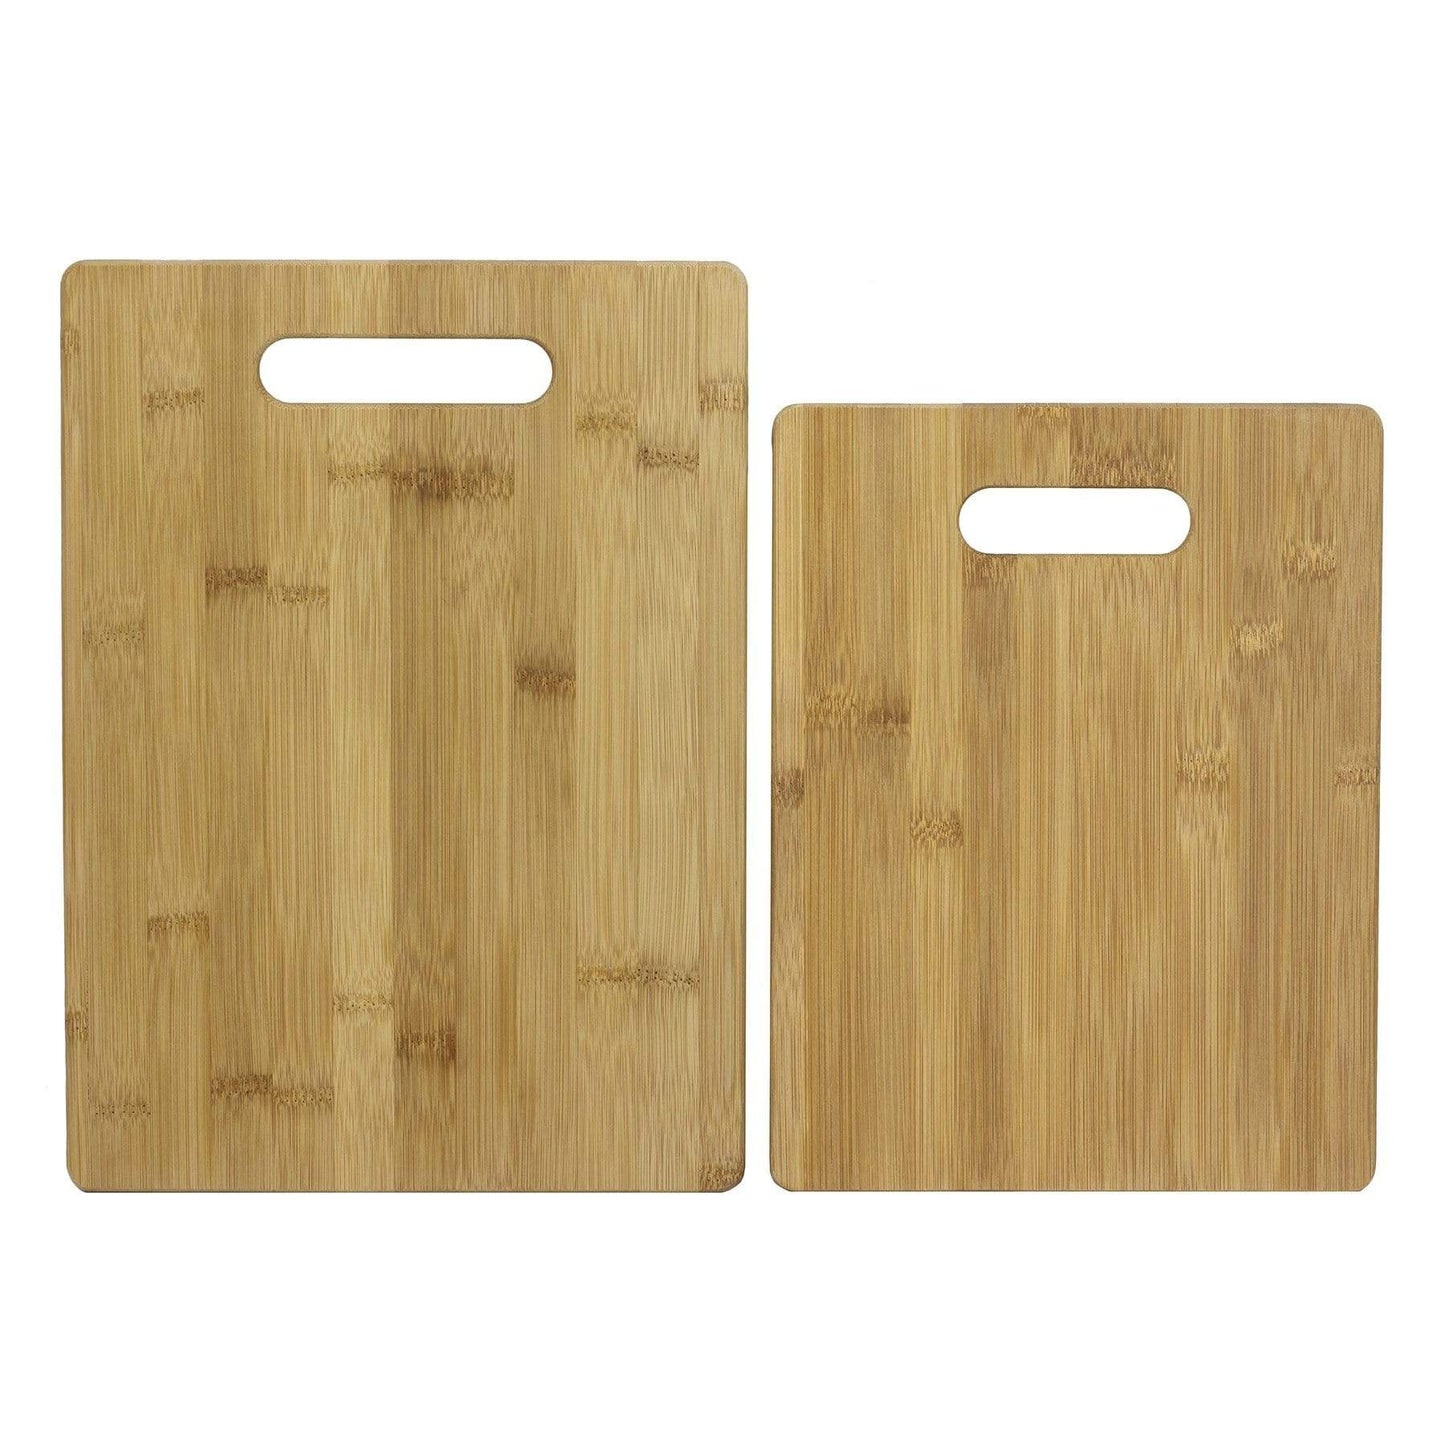 Totally Bamboo Boards